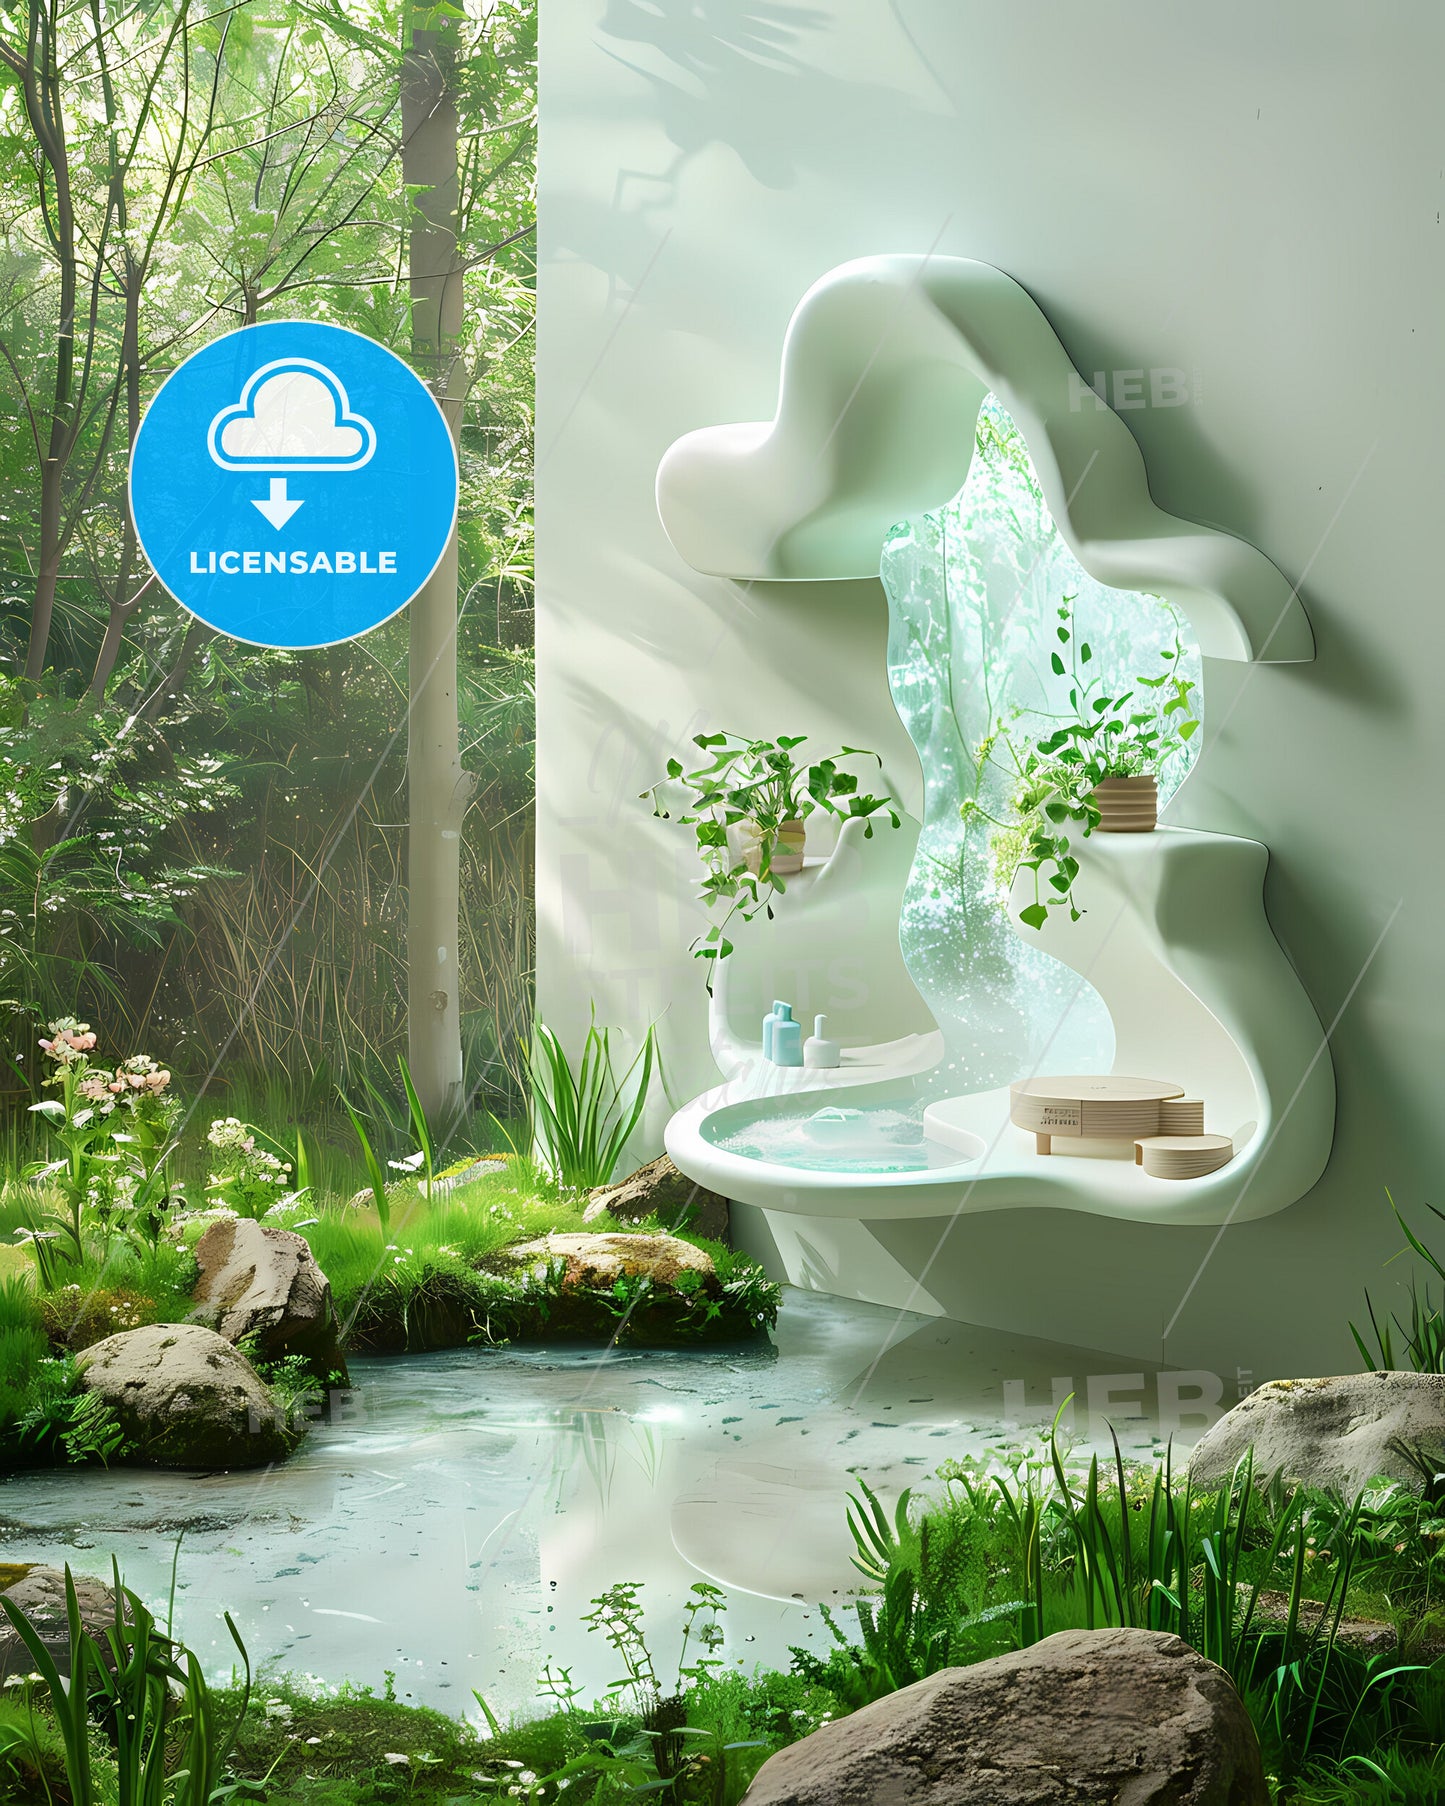 Abstract White Cloud-Shaped Shelf Floating in Air Above Lush Nature with Green Wall and Waterfall Pond Painting